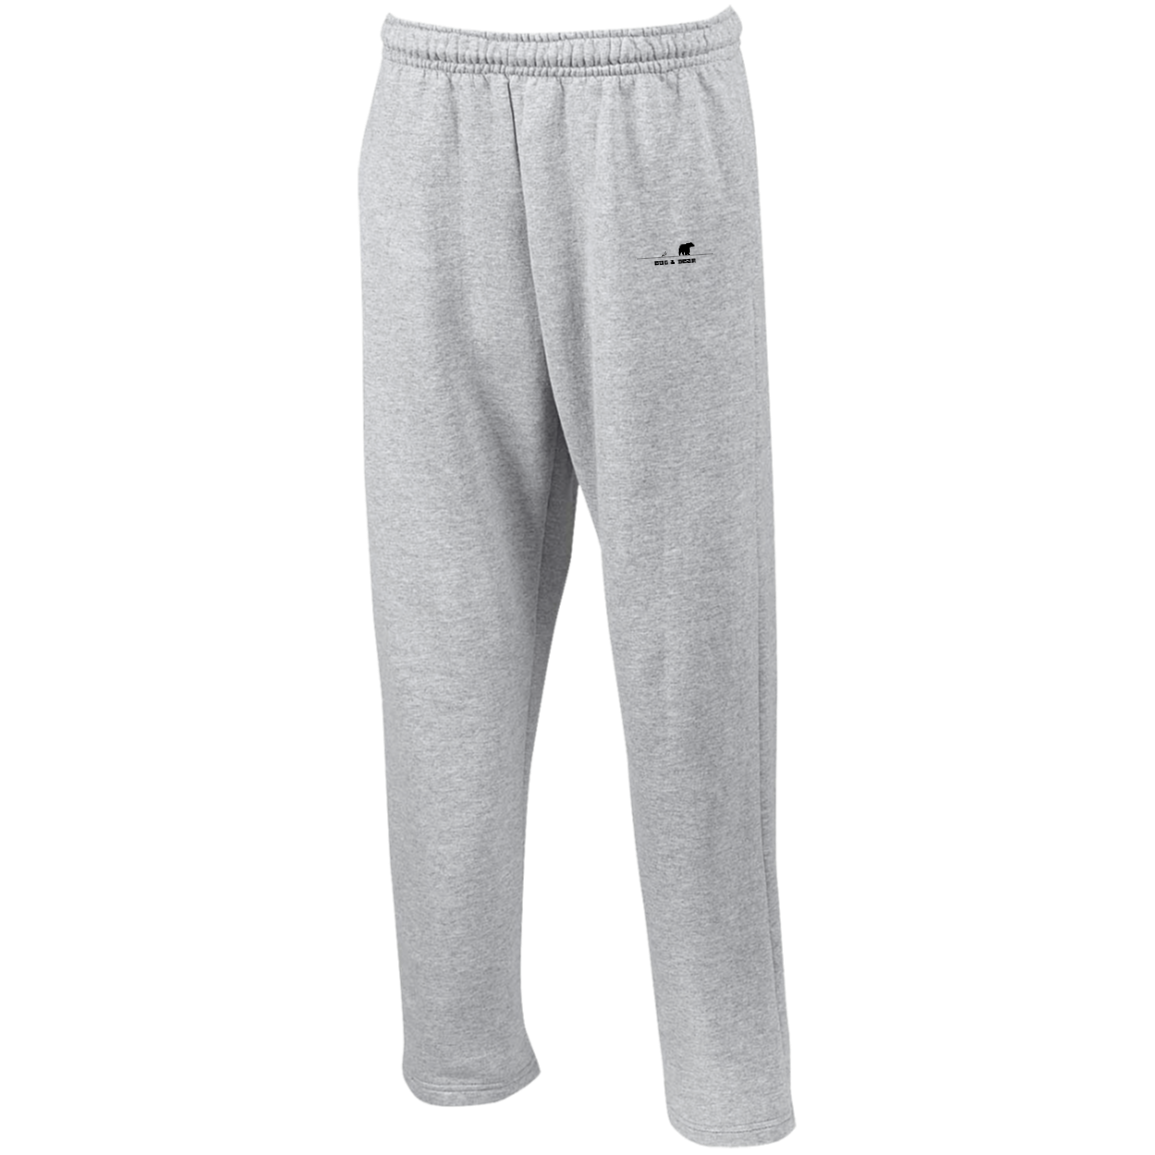 974MP Open Bottom Sweatpants with Pockets